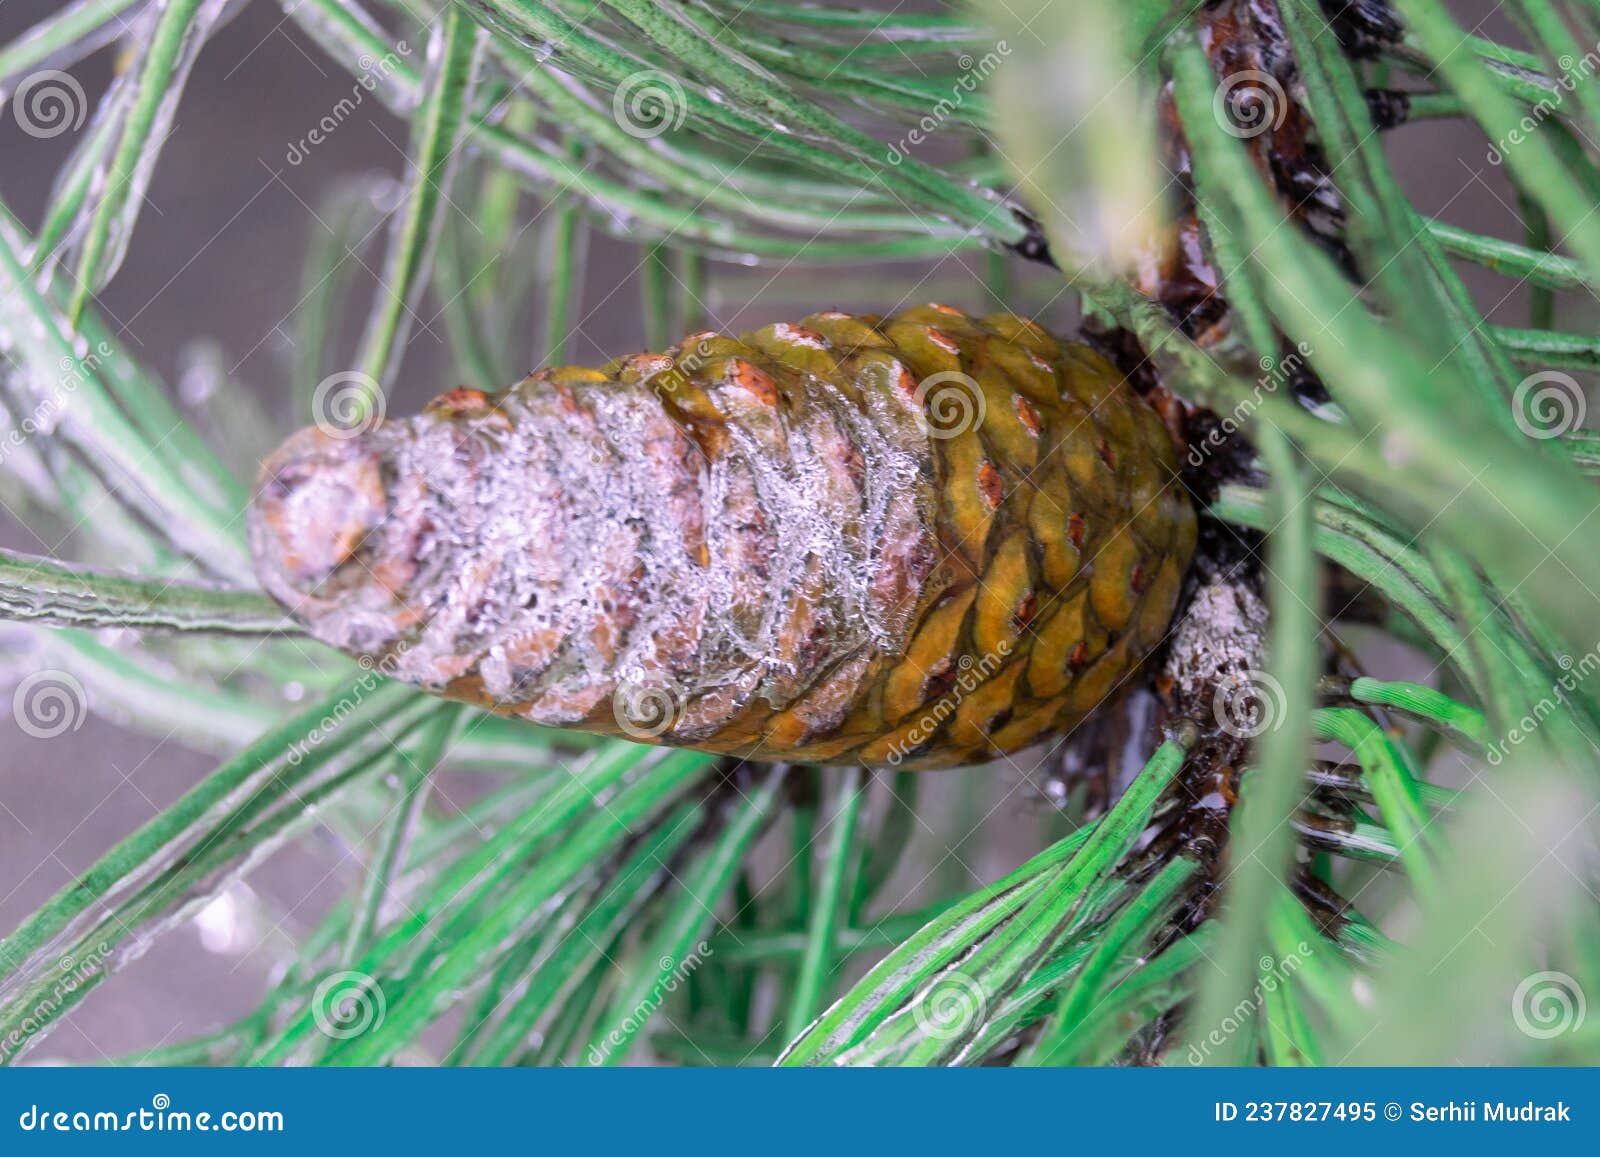 green pine needles and cone incased in ice during ice storm